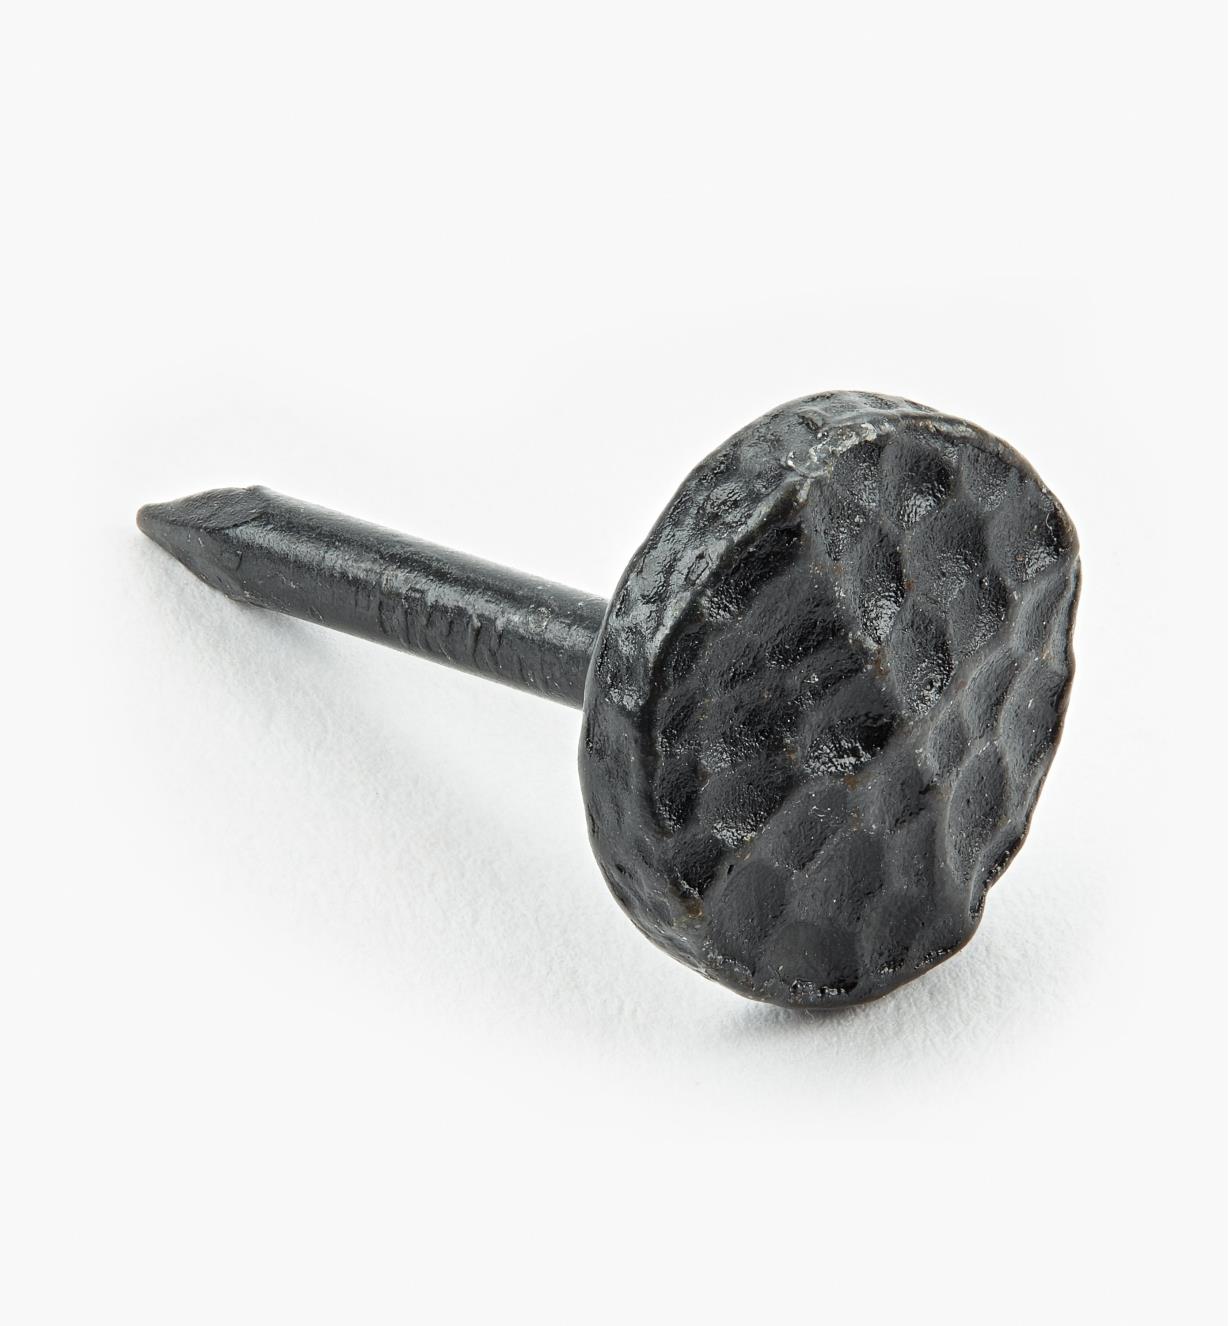 00T0900 - Black Hammered-Finish, Round Head, 1/2" Clavo, ea.